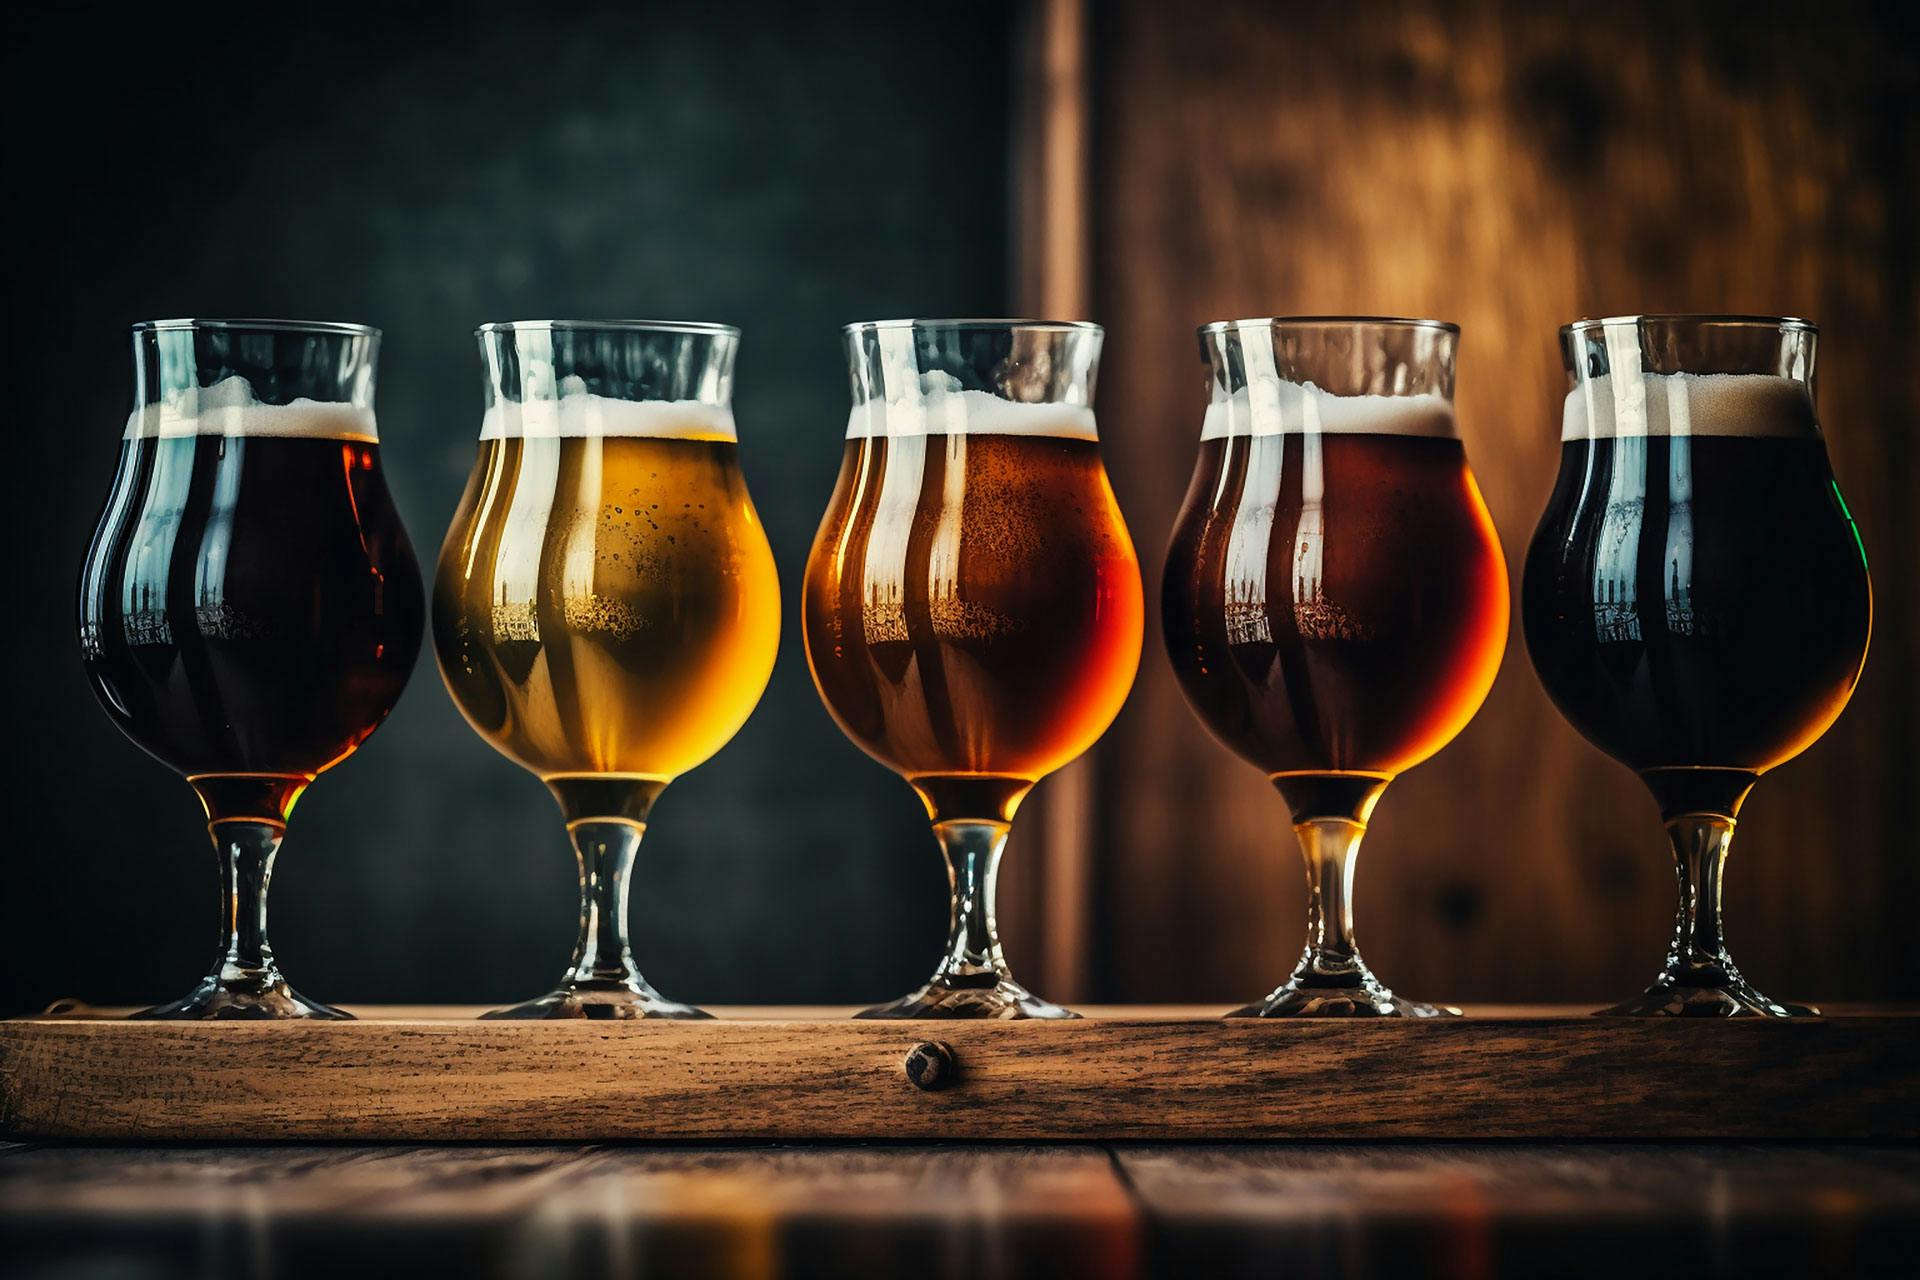 Flight of beer on a wooden surface